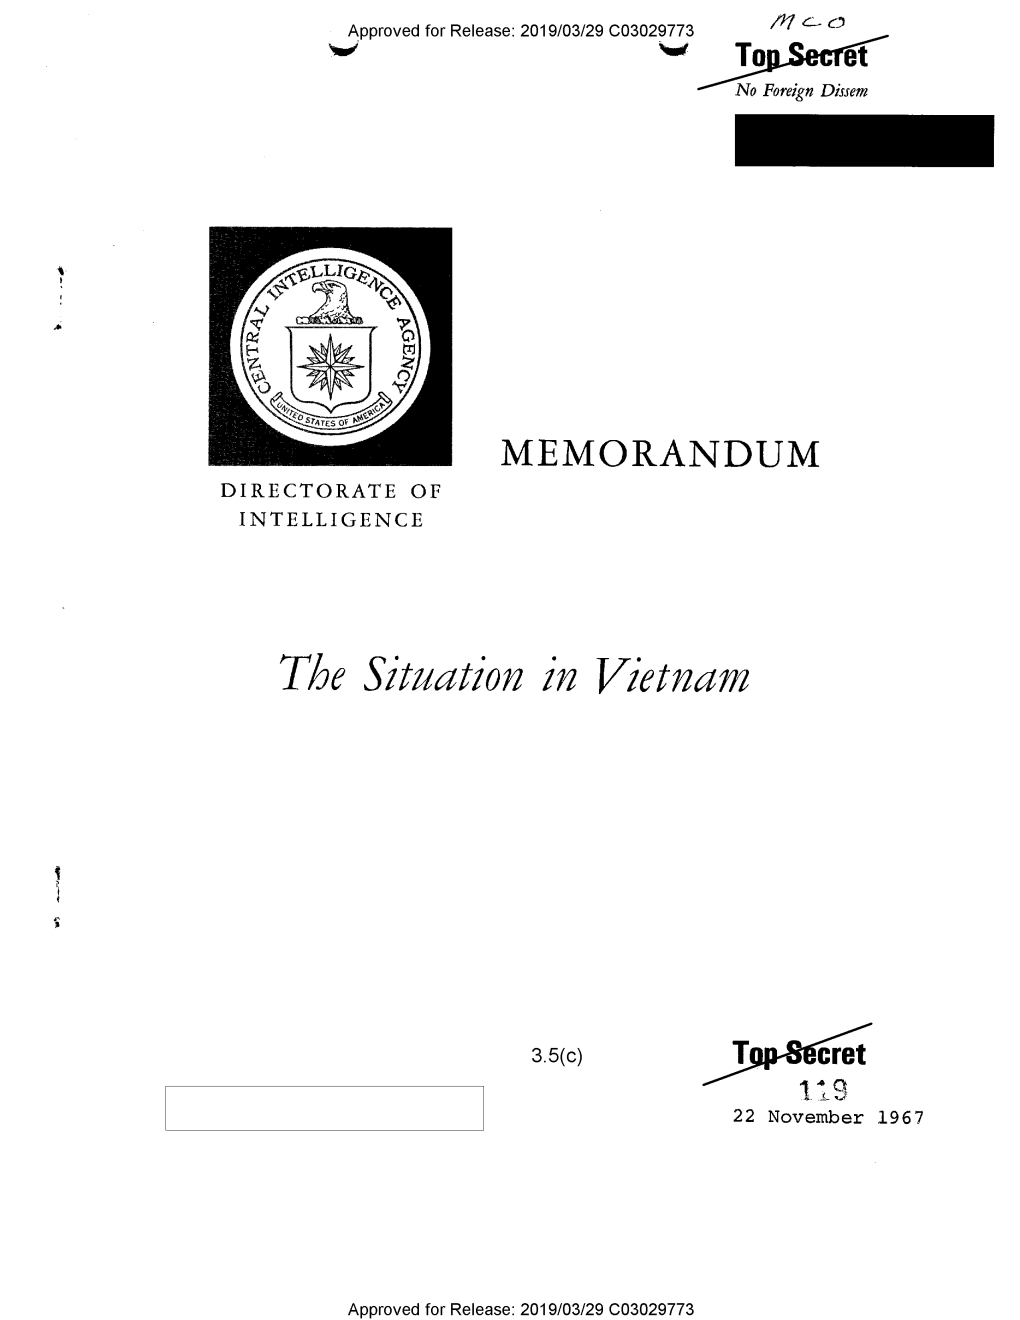 Report on the Situation in Vietnam, 22 November 1967